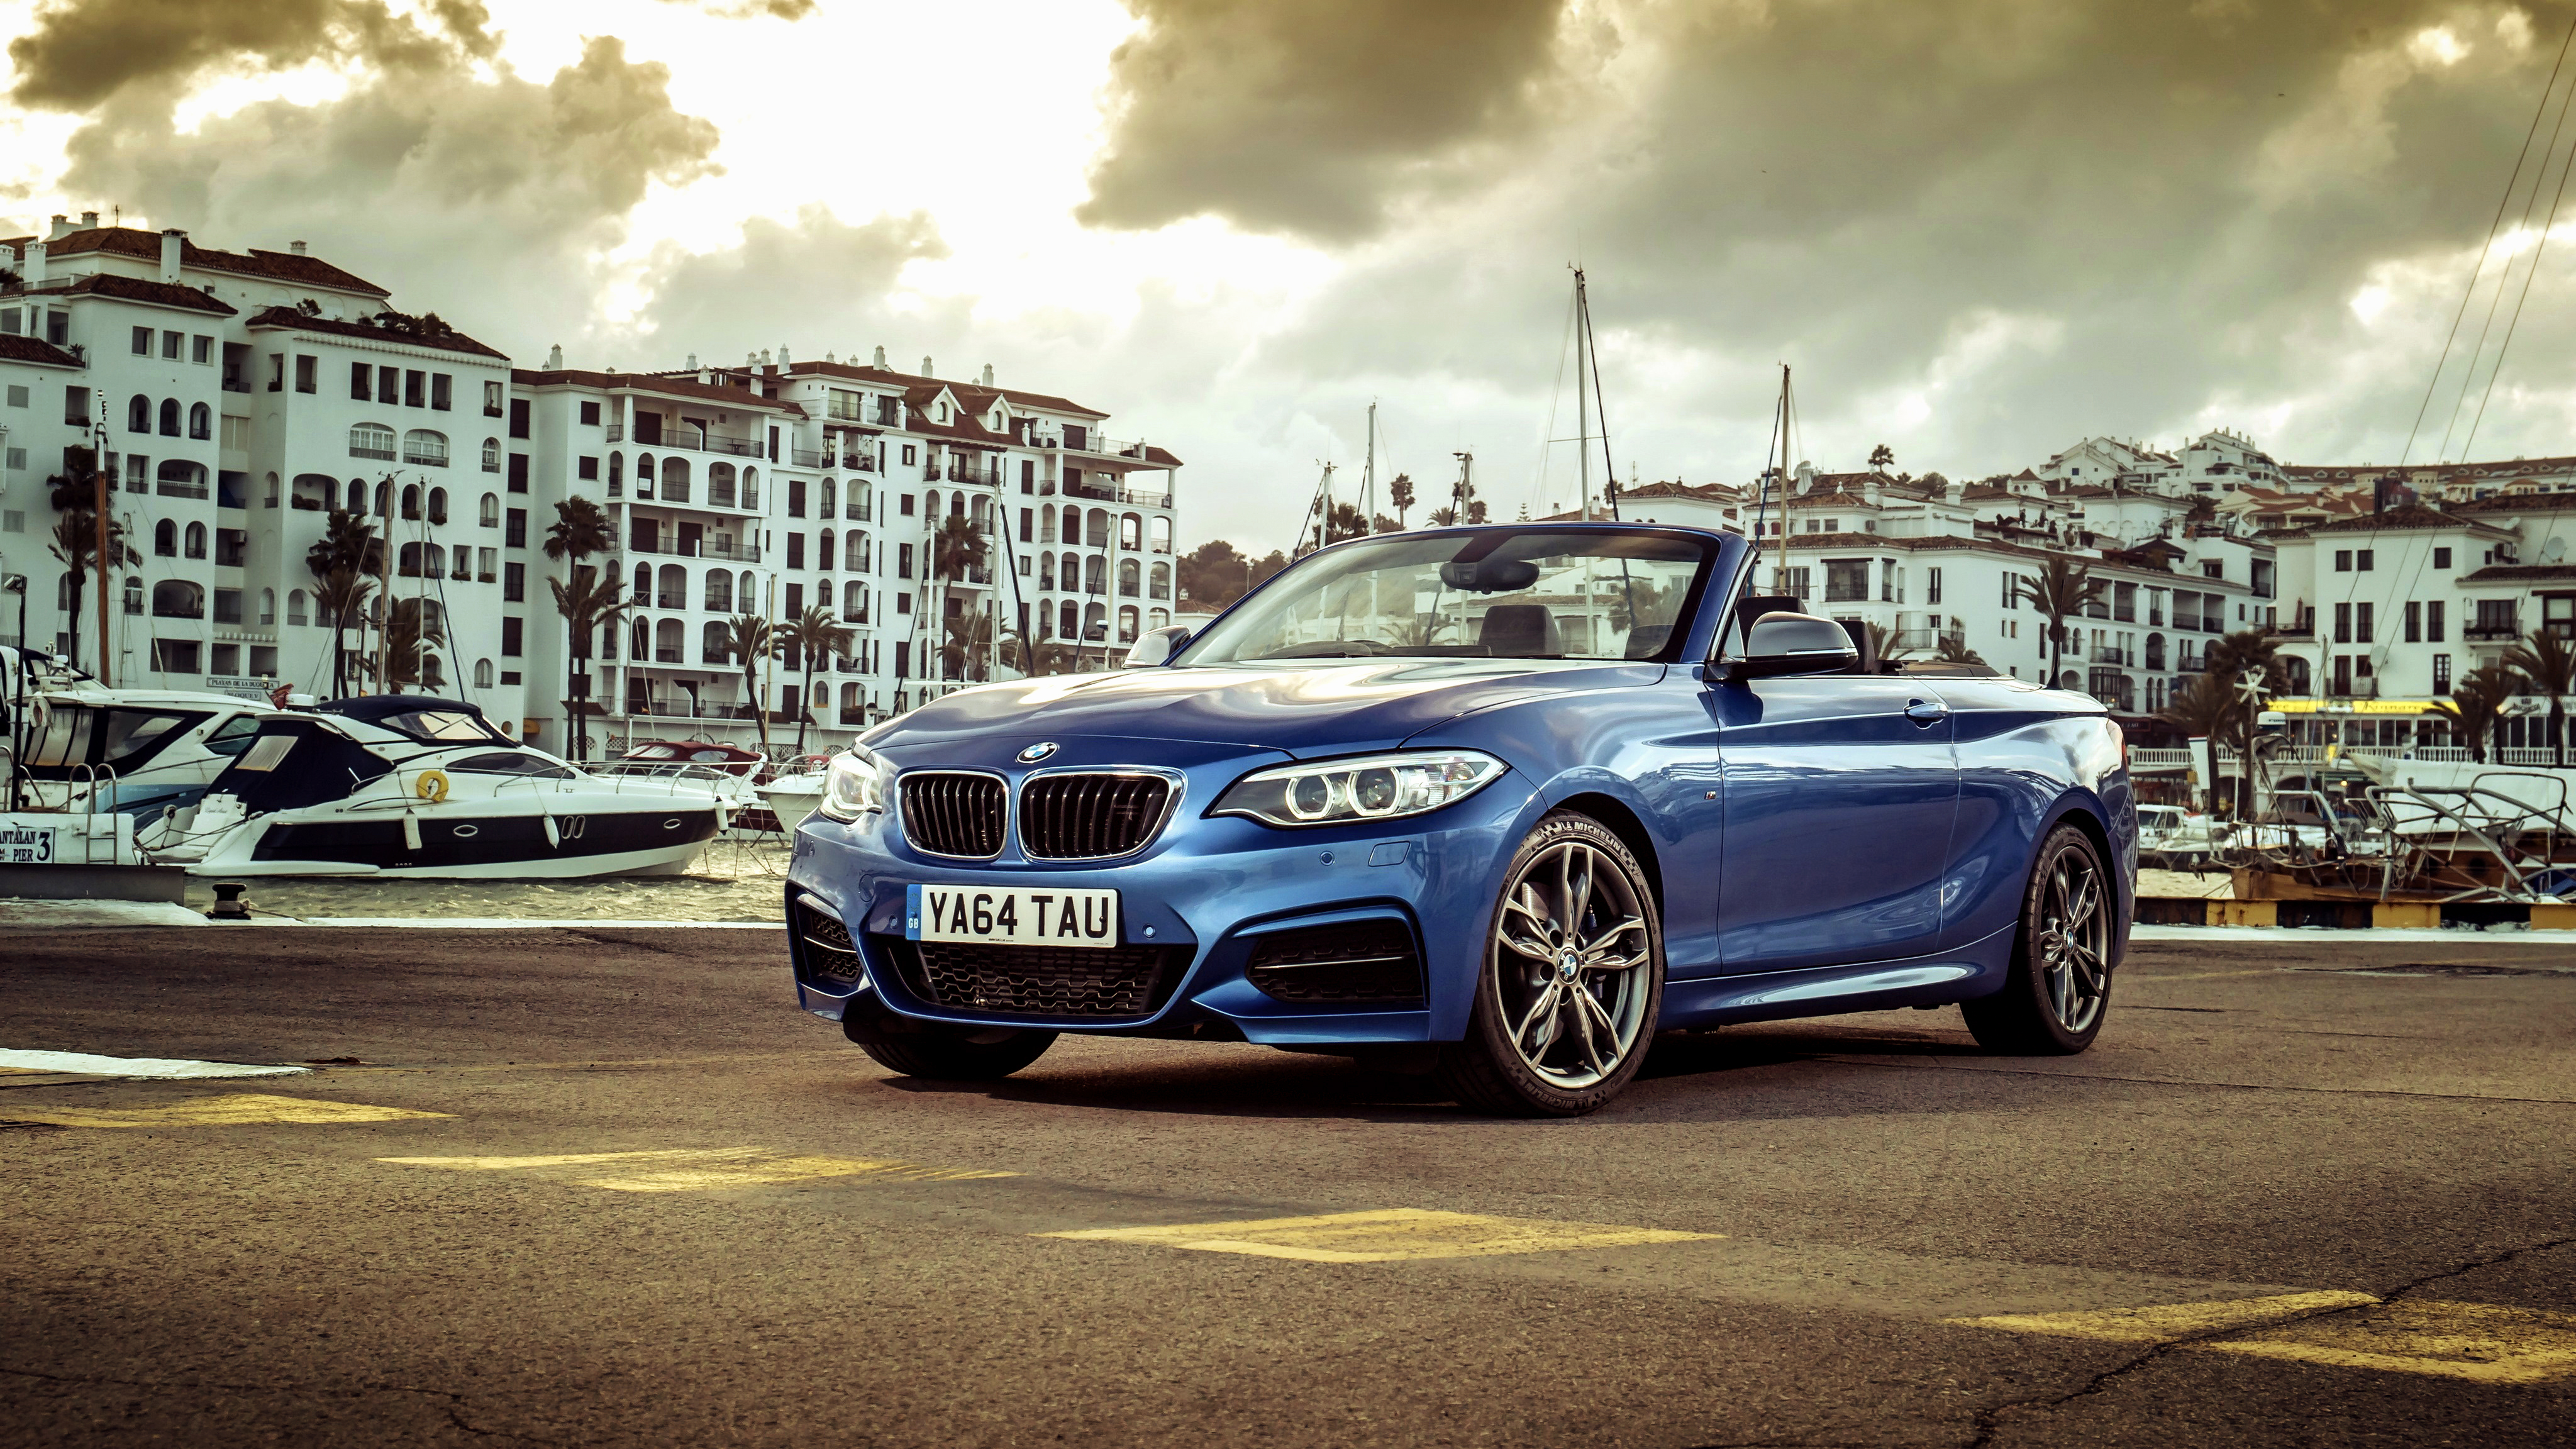 130846 Screensavers and Wallpapers Cabriolet for phone. Download bmw, cars, blue, cabriolet, wharf, berth, 2015, uk-spec, m235i, f23 pictures for free